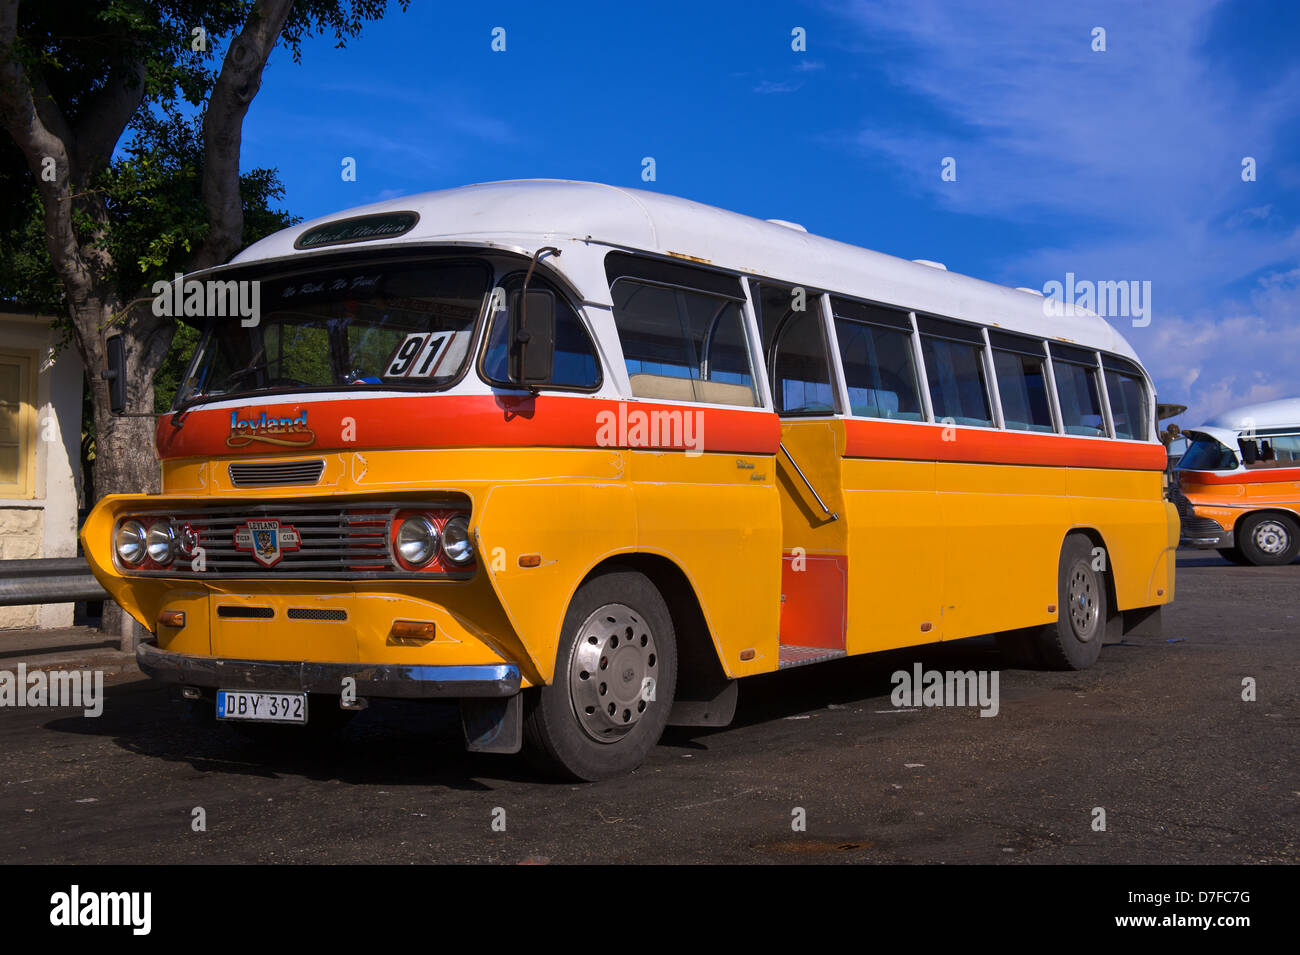 The multi colored, vintage buses on the Island of Malta, seen here in the capital, Valletta Stock Photo